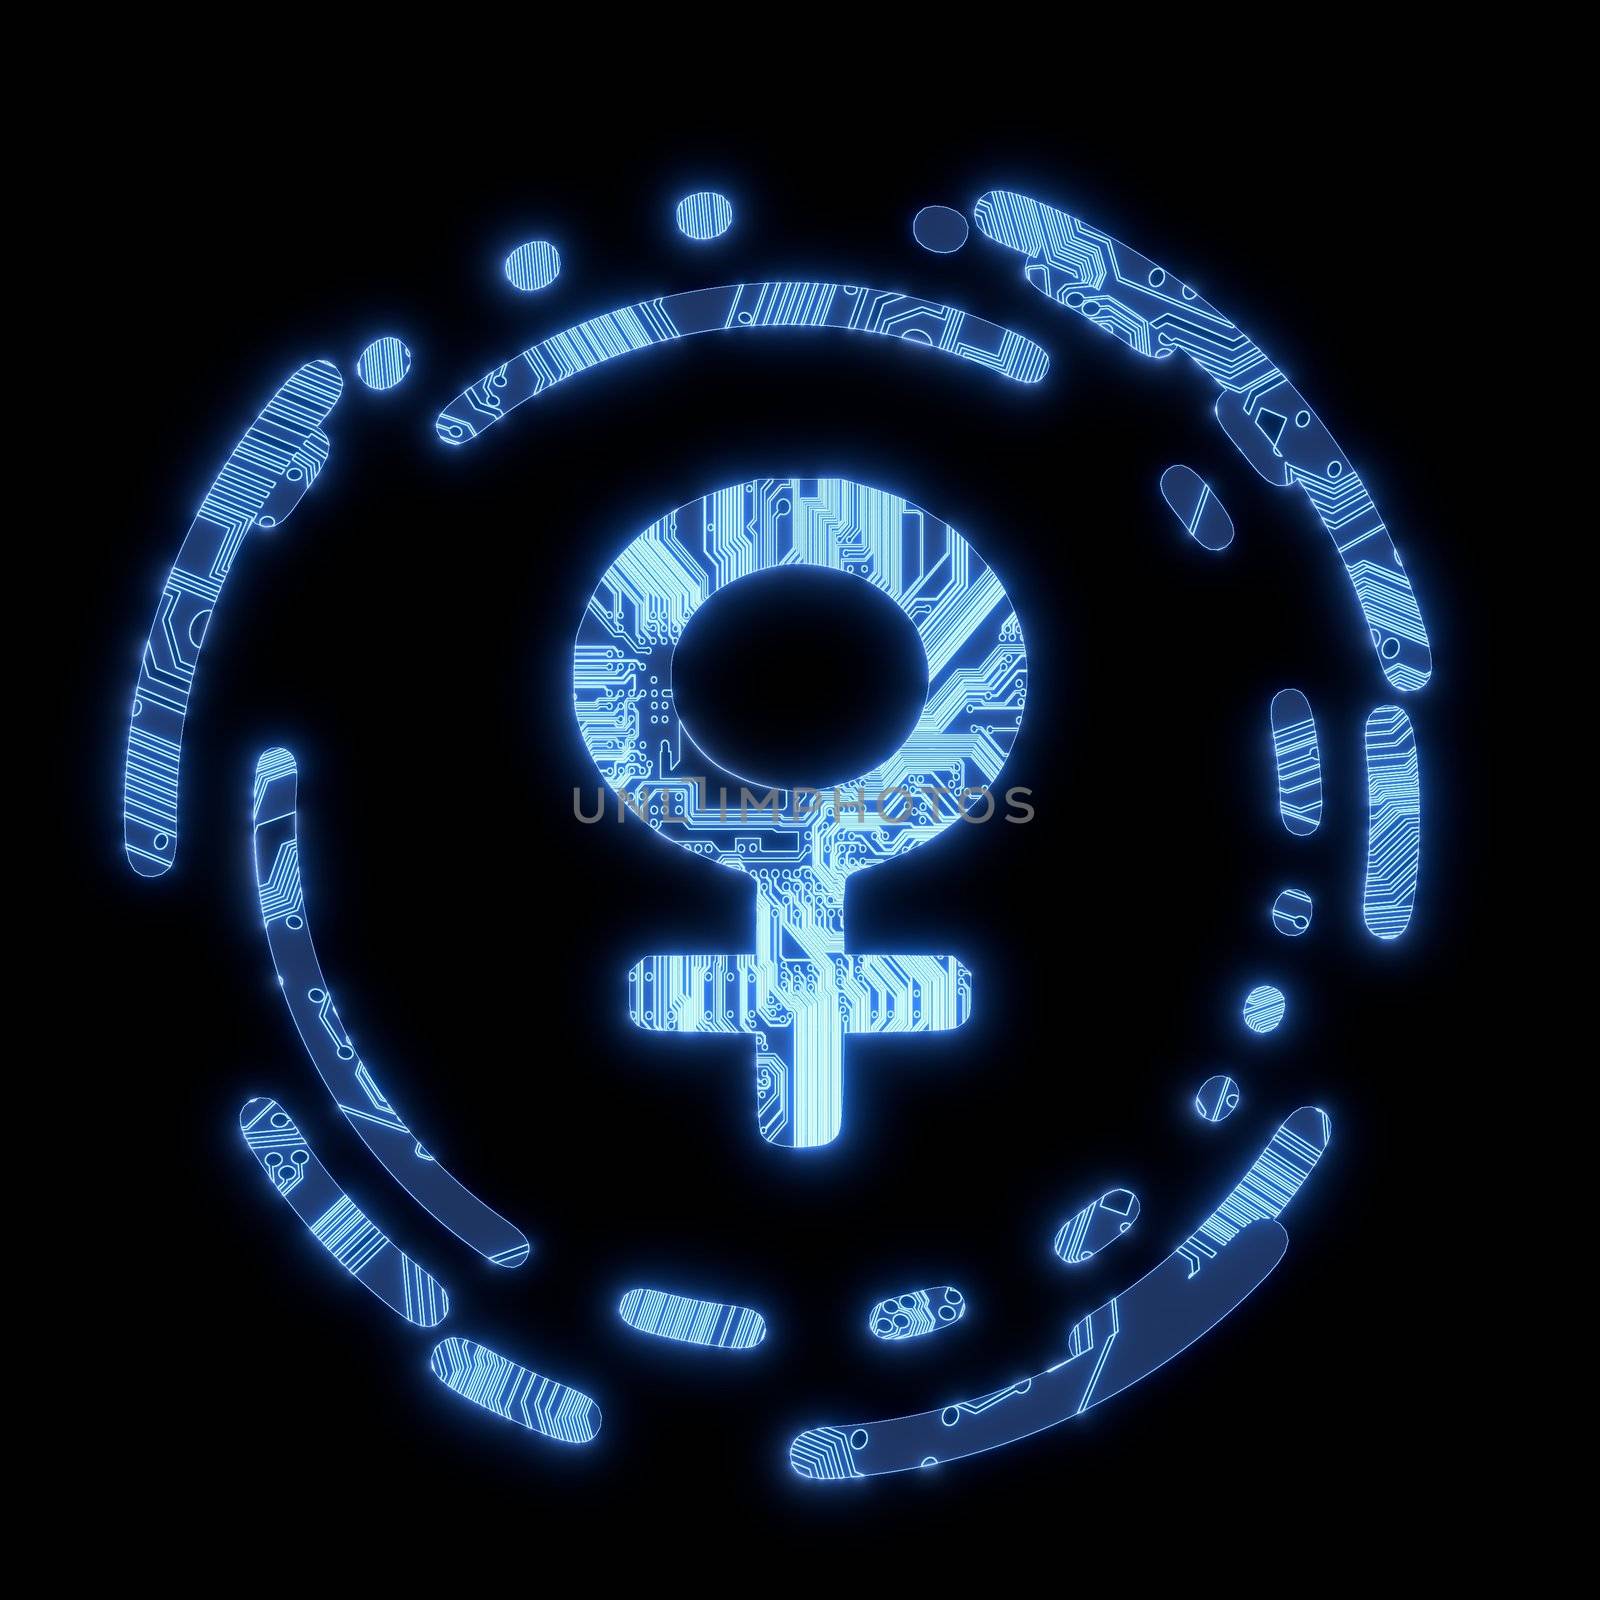 Illuminated woman symbol on a computer chip by onirb